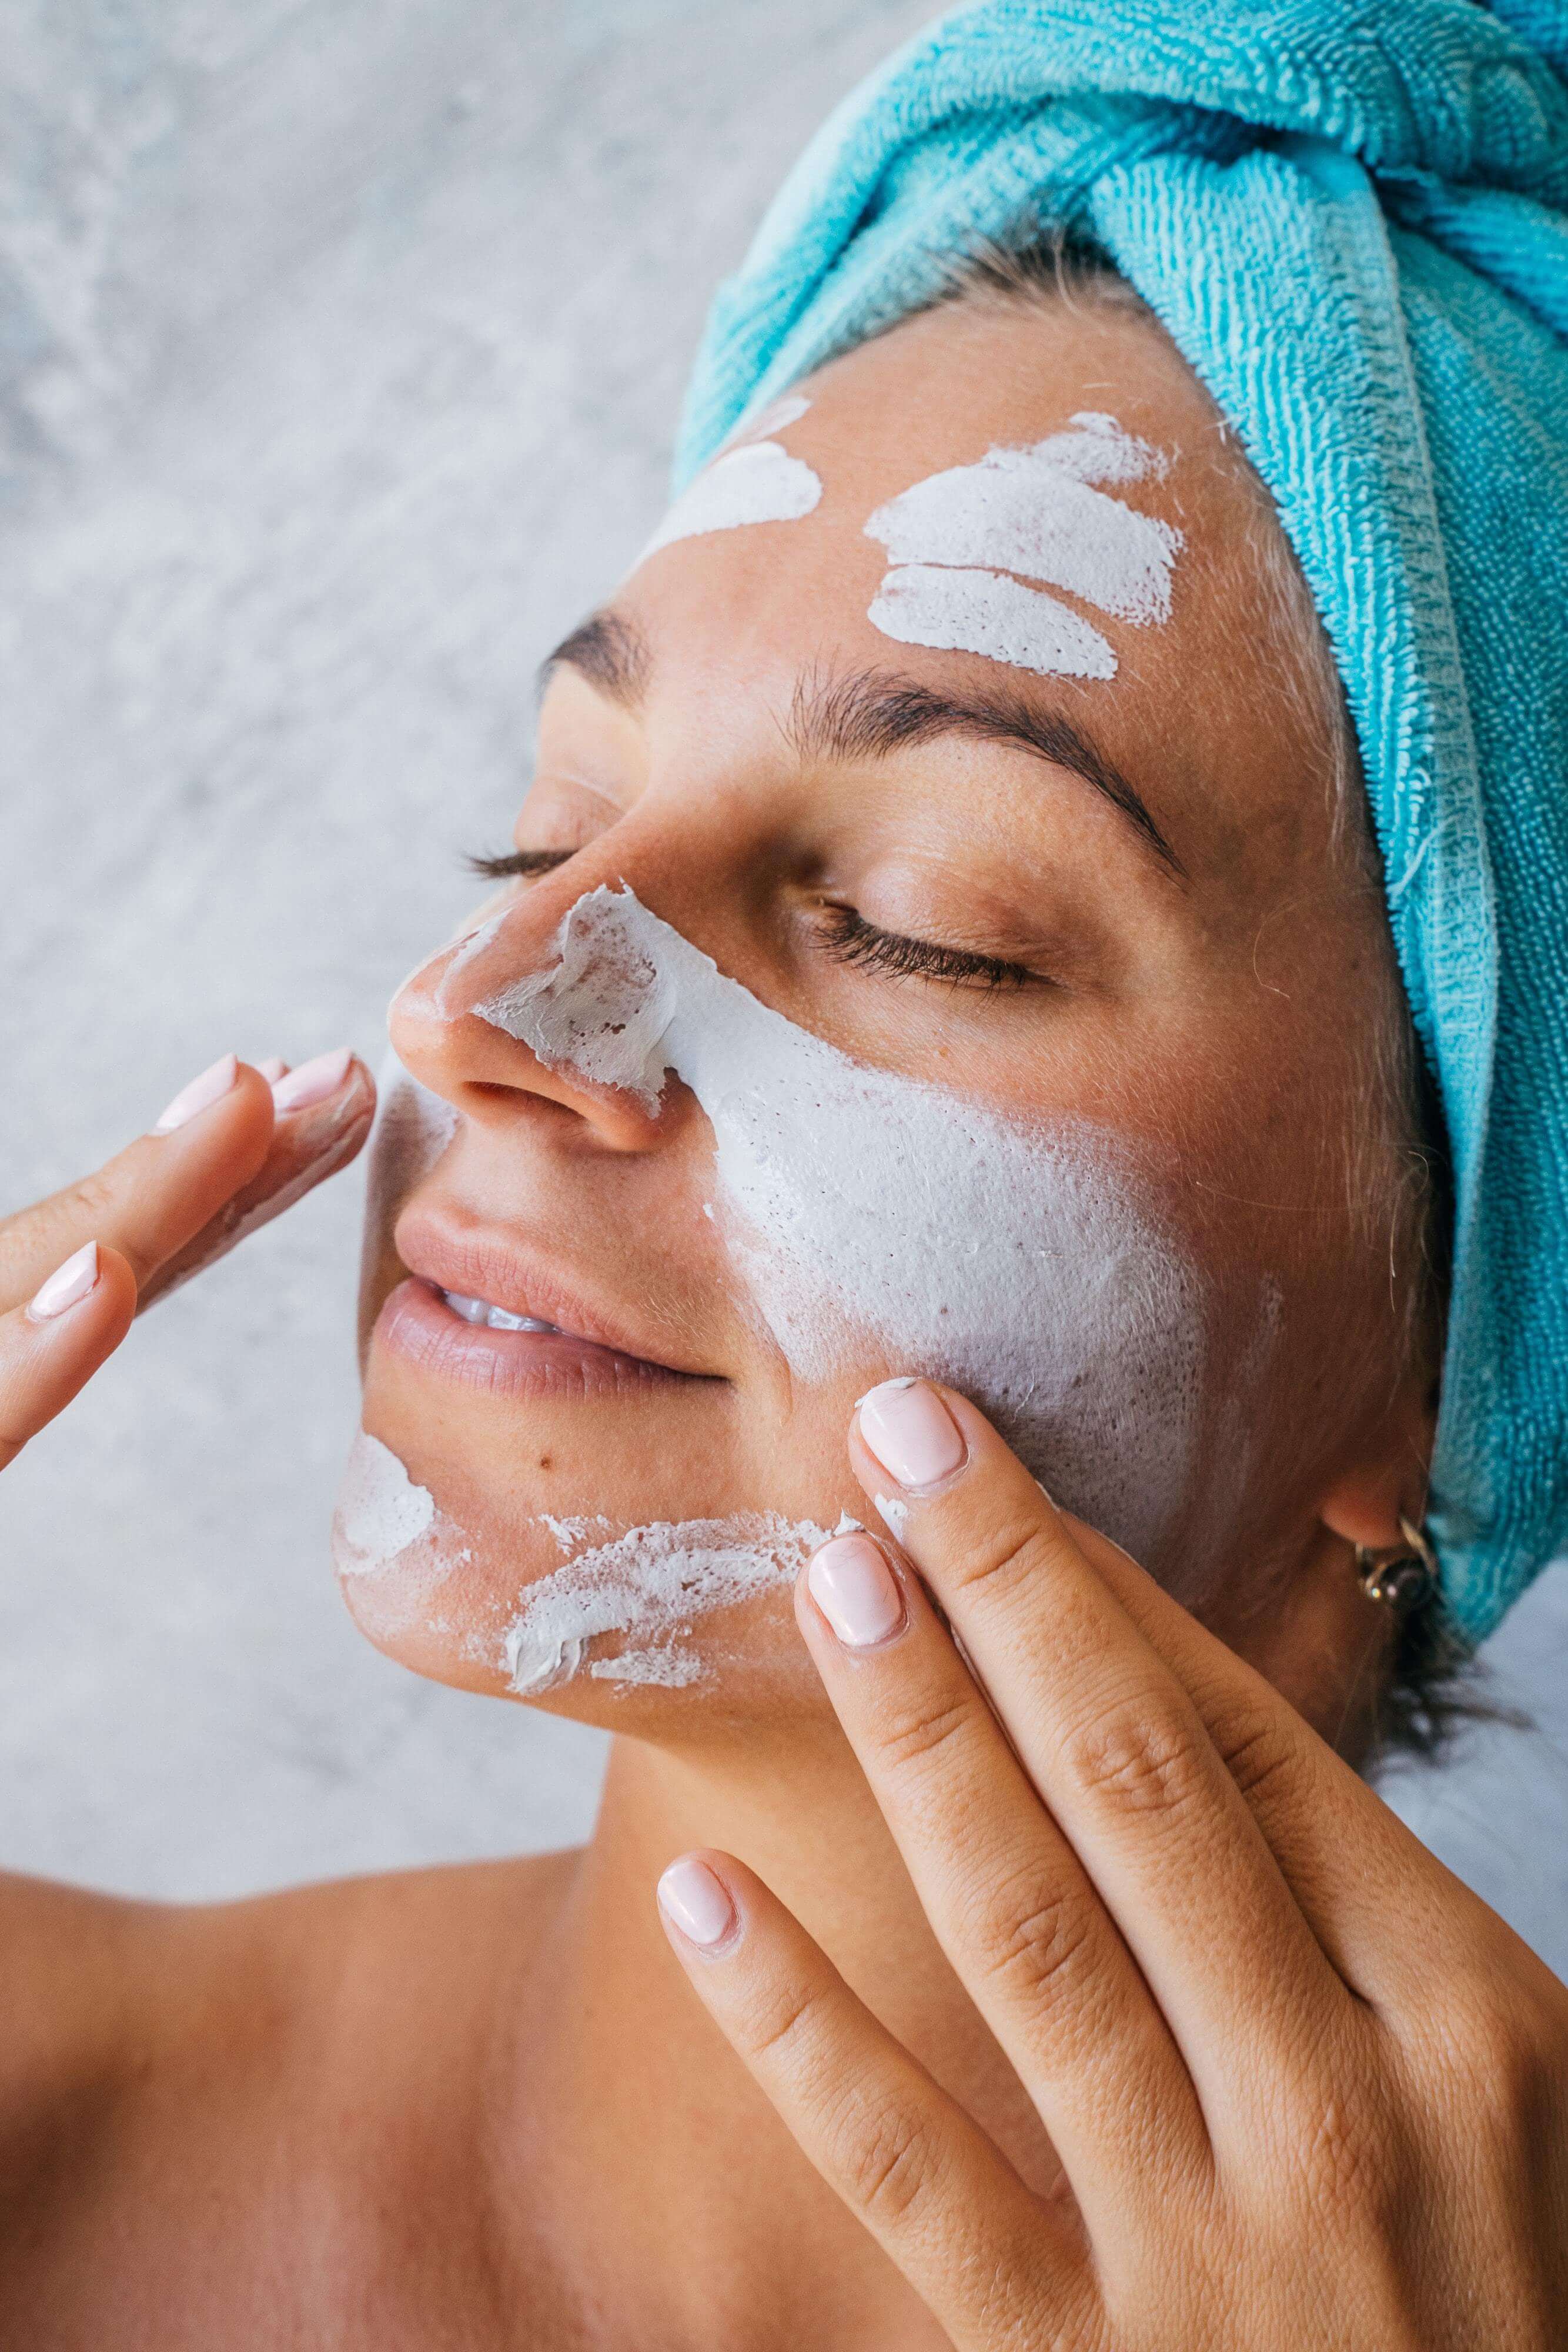 The Truth About Skincare: What Ingredients Actually Work